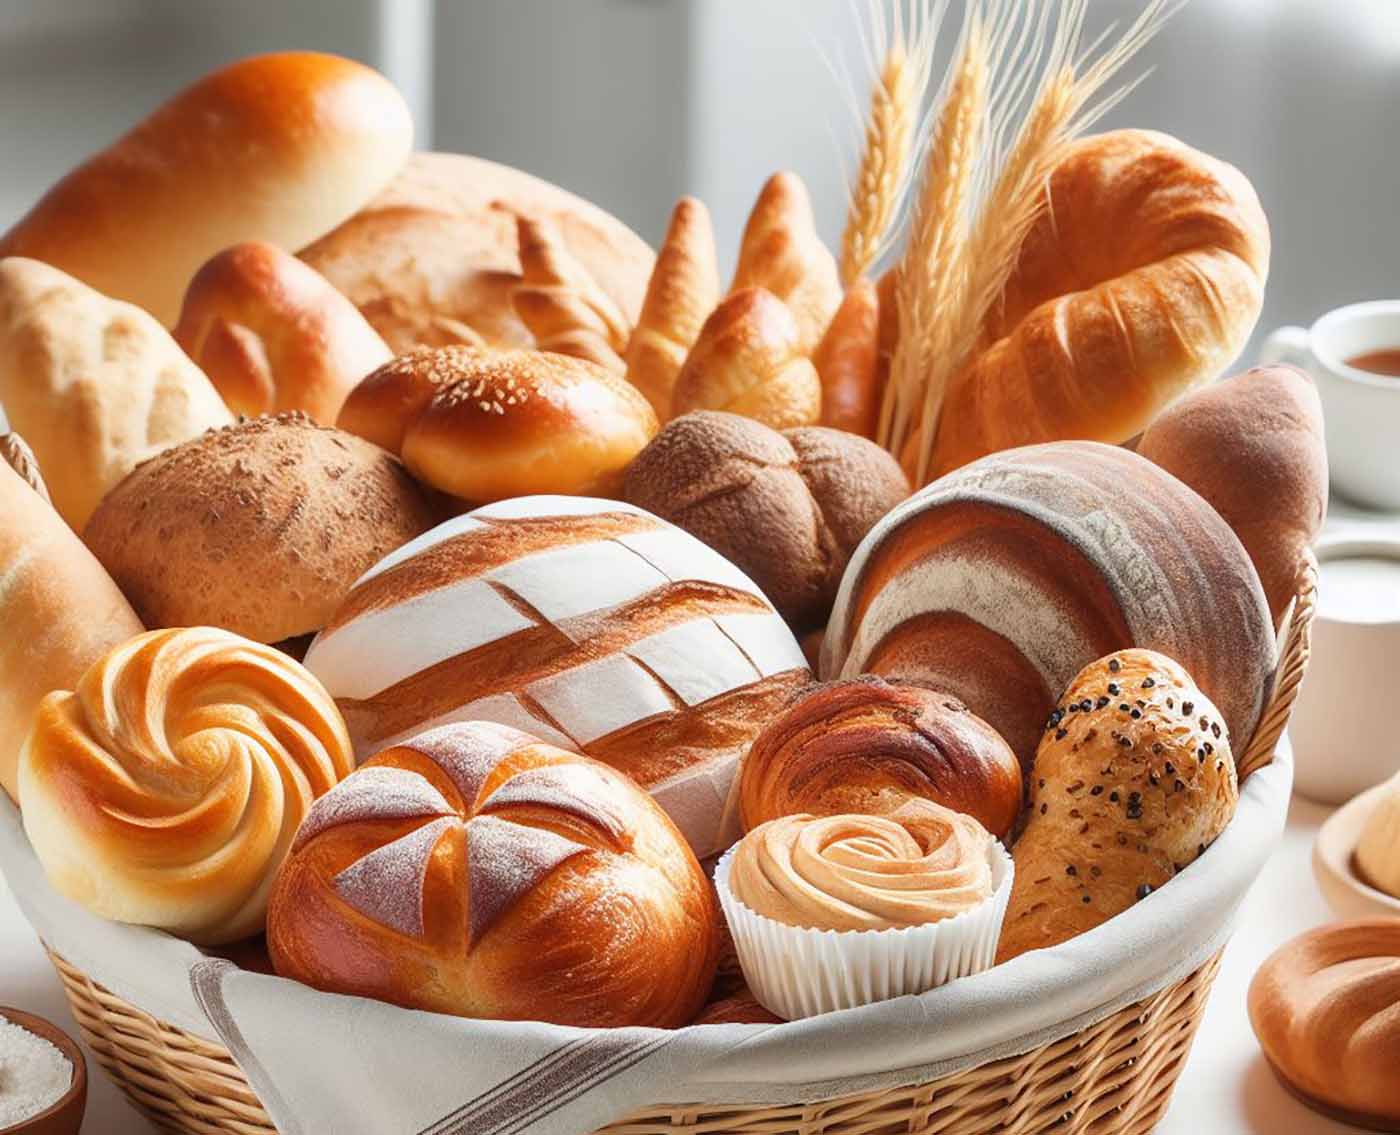 The basket with various types of breads.